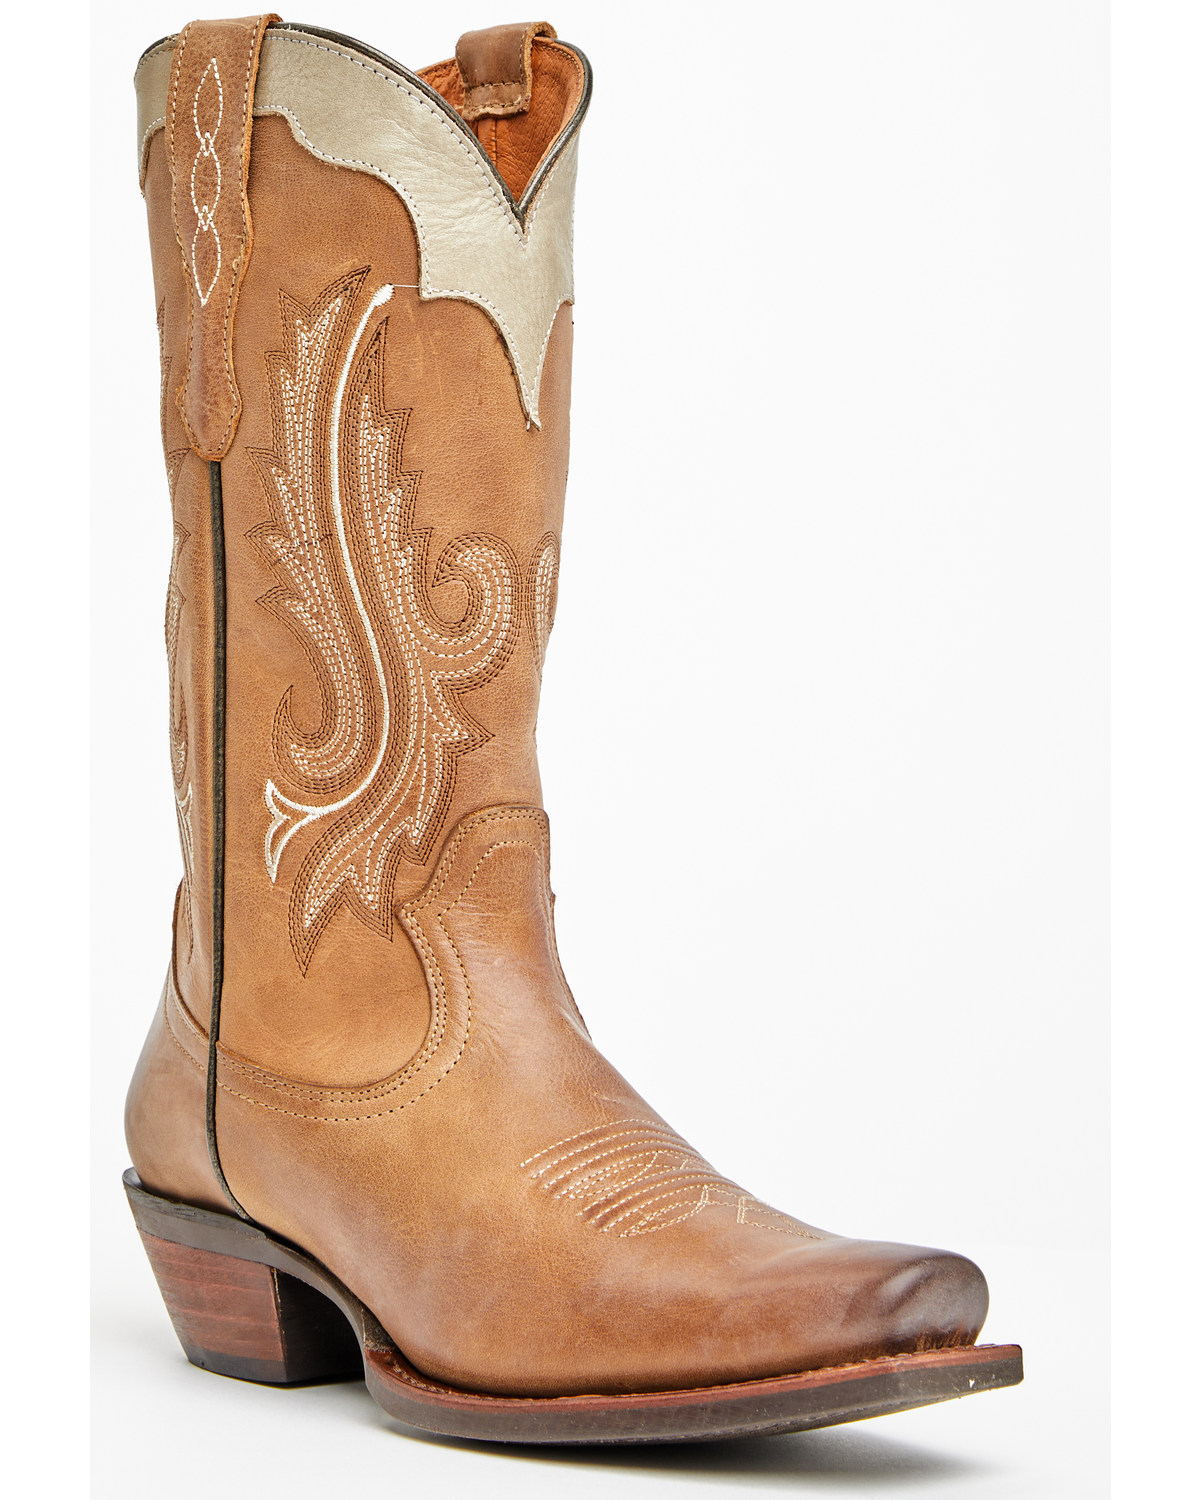 Idyllwind Women's Lindale Western Performance Boots - Square Toe